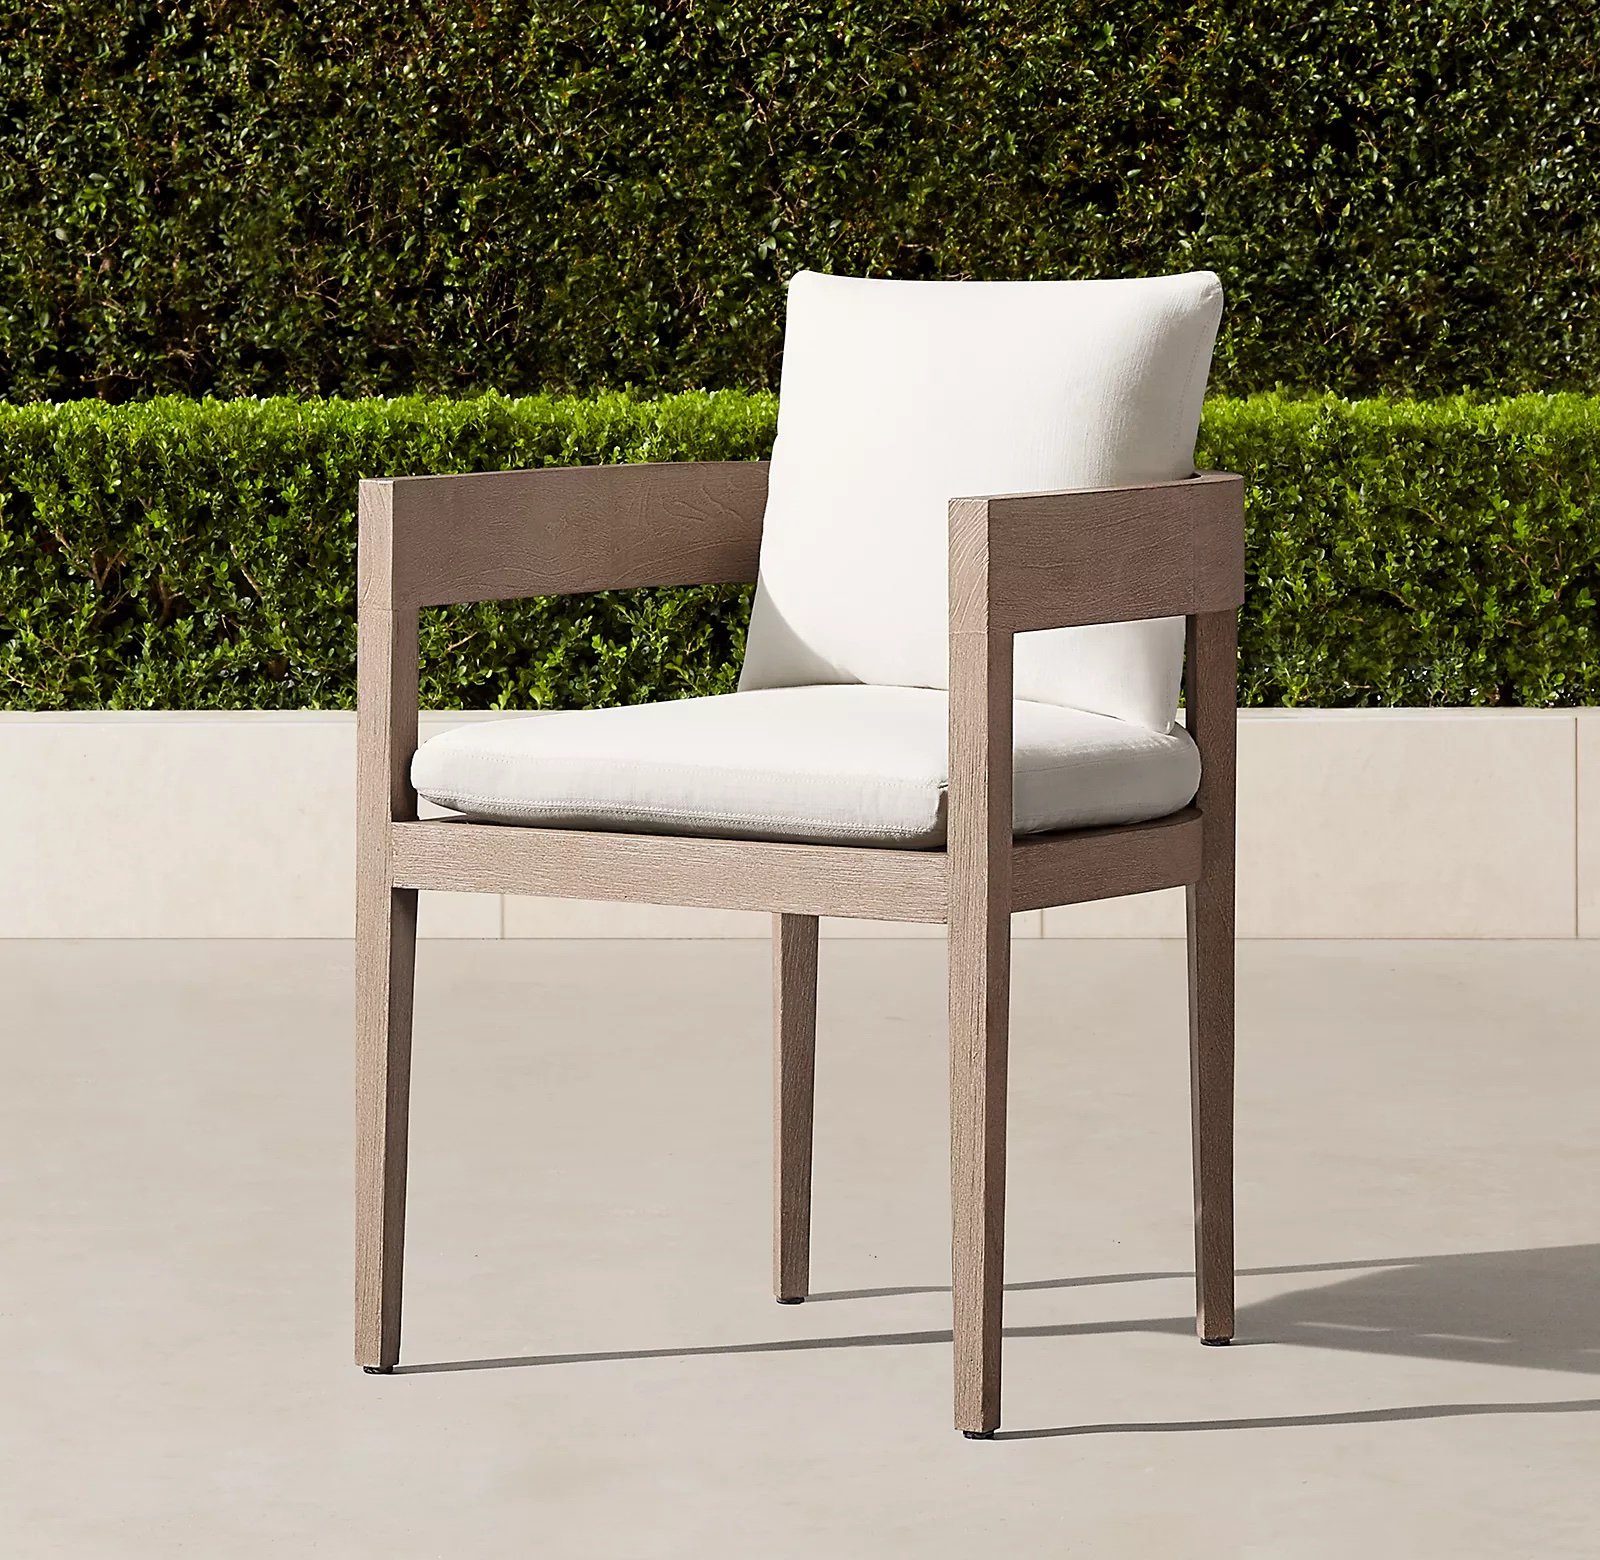 Teak long-legged outdoor dining chair with rounded back and armrest frame and white cushions